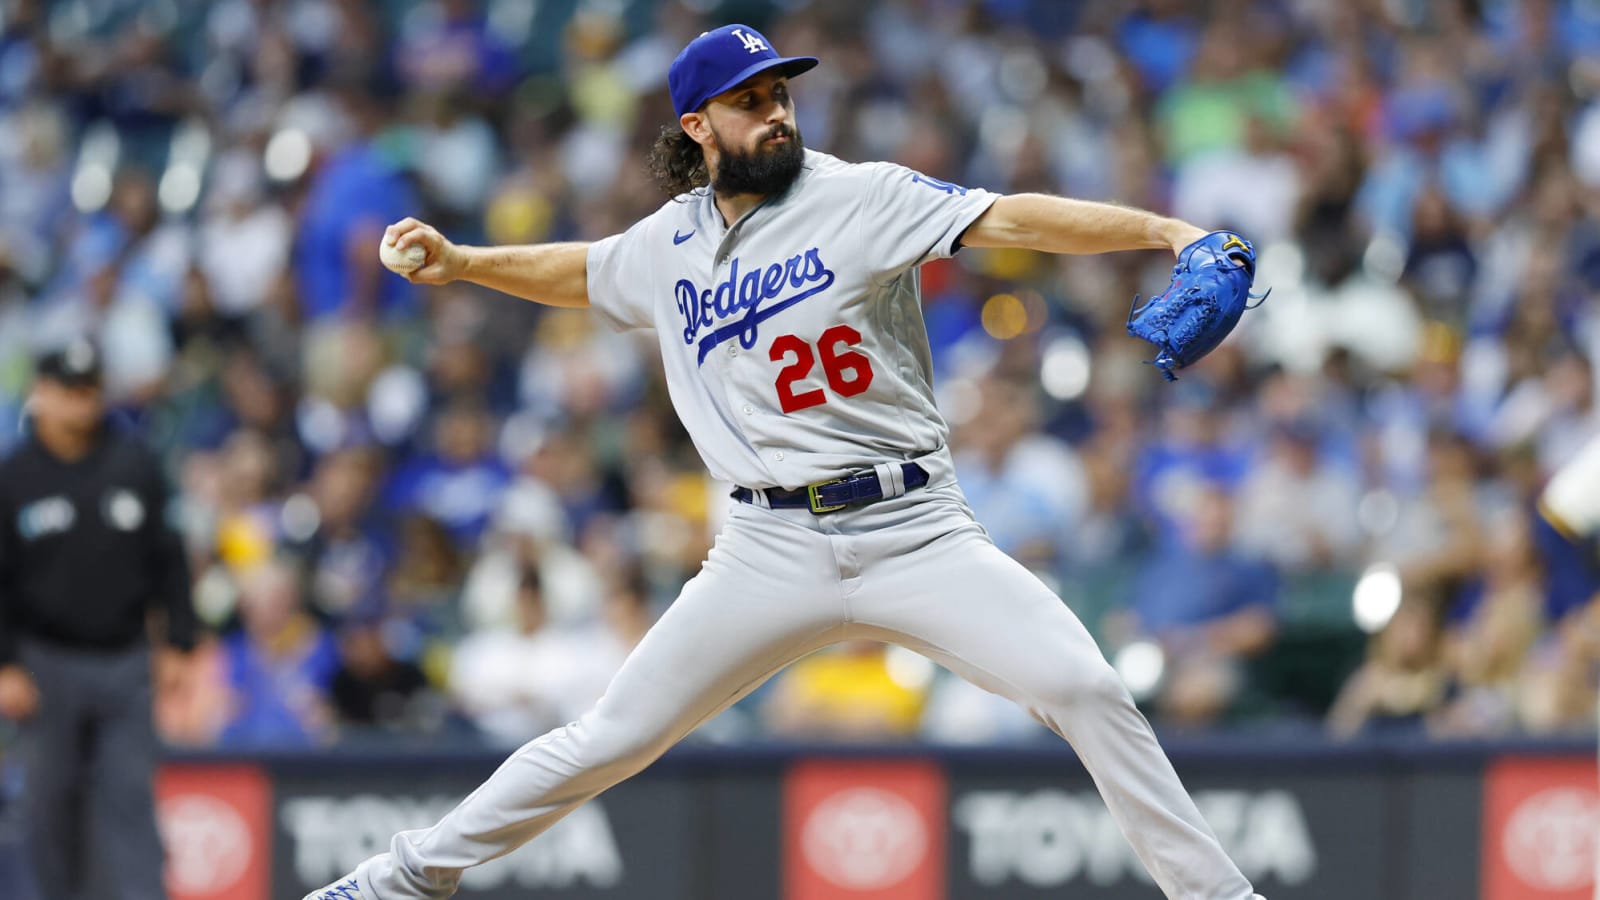 Report: Dodgers' Gonsolin's forearm soreness 'not responding well'